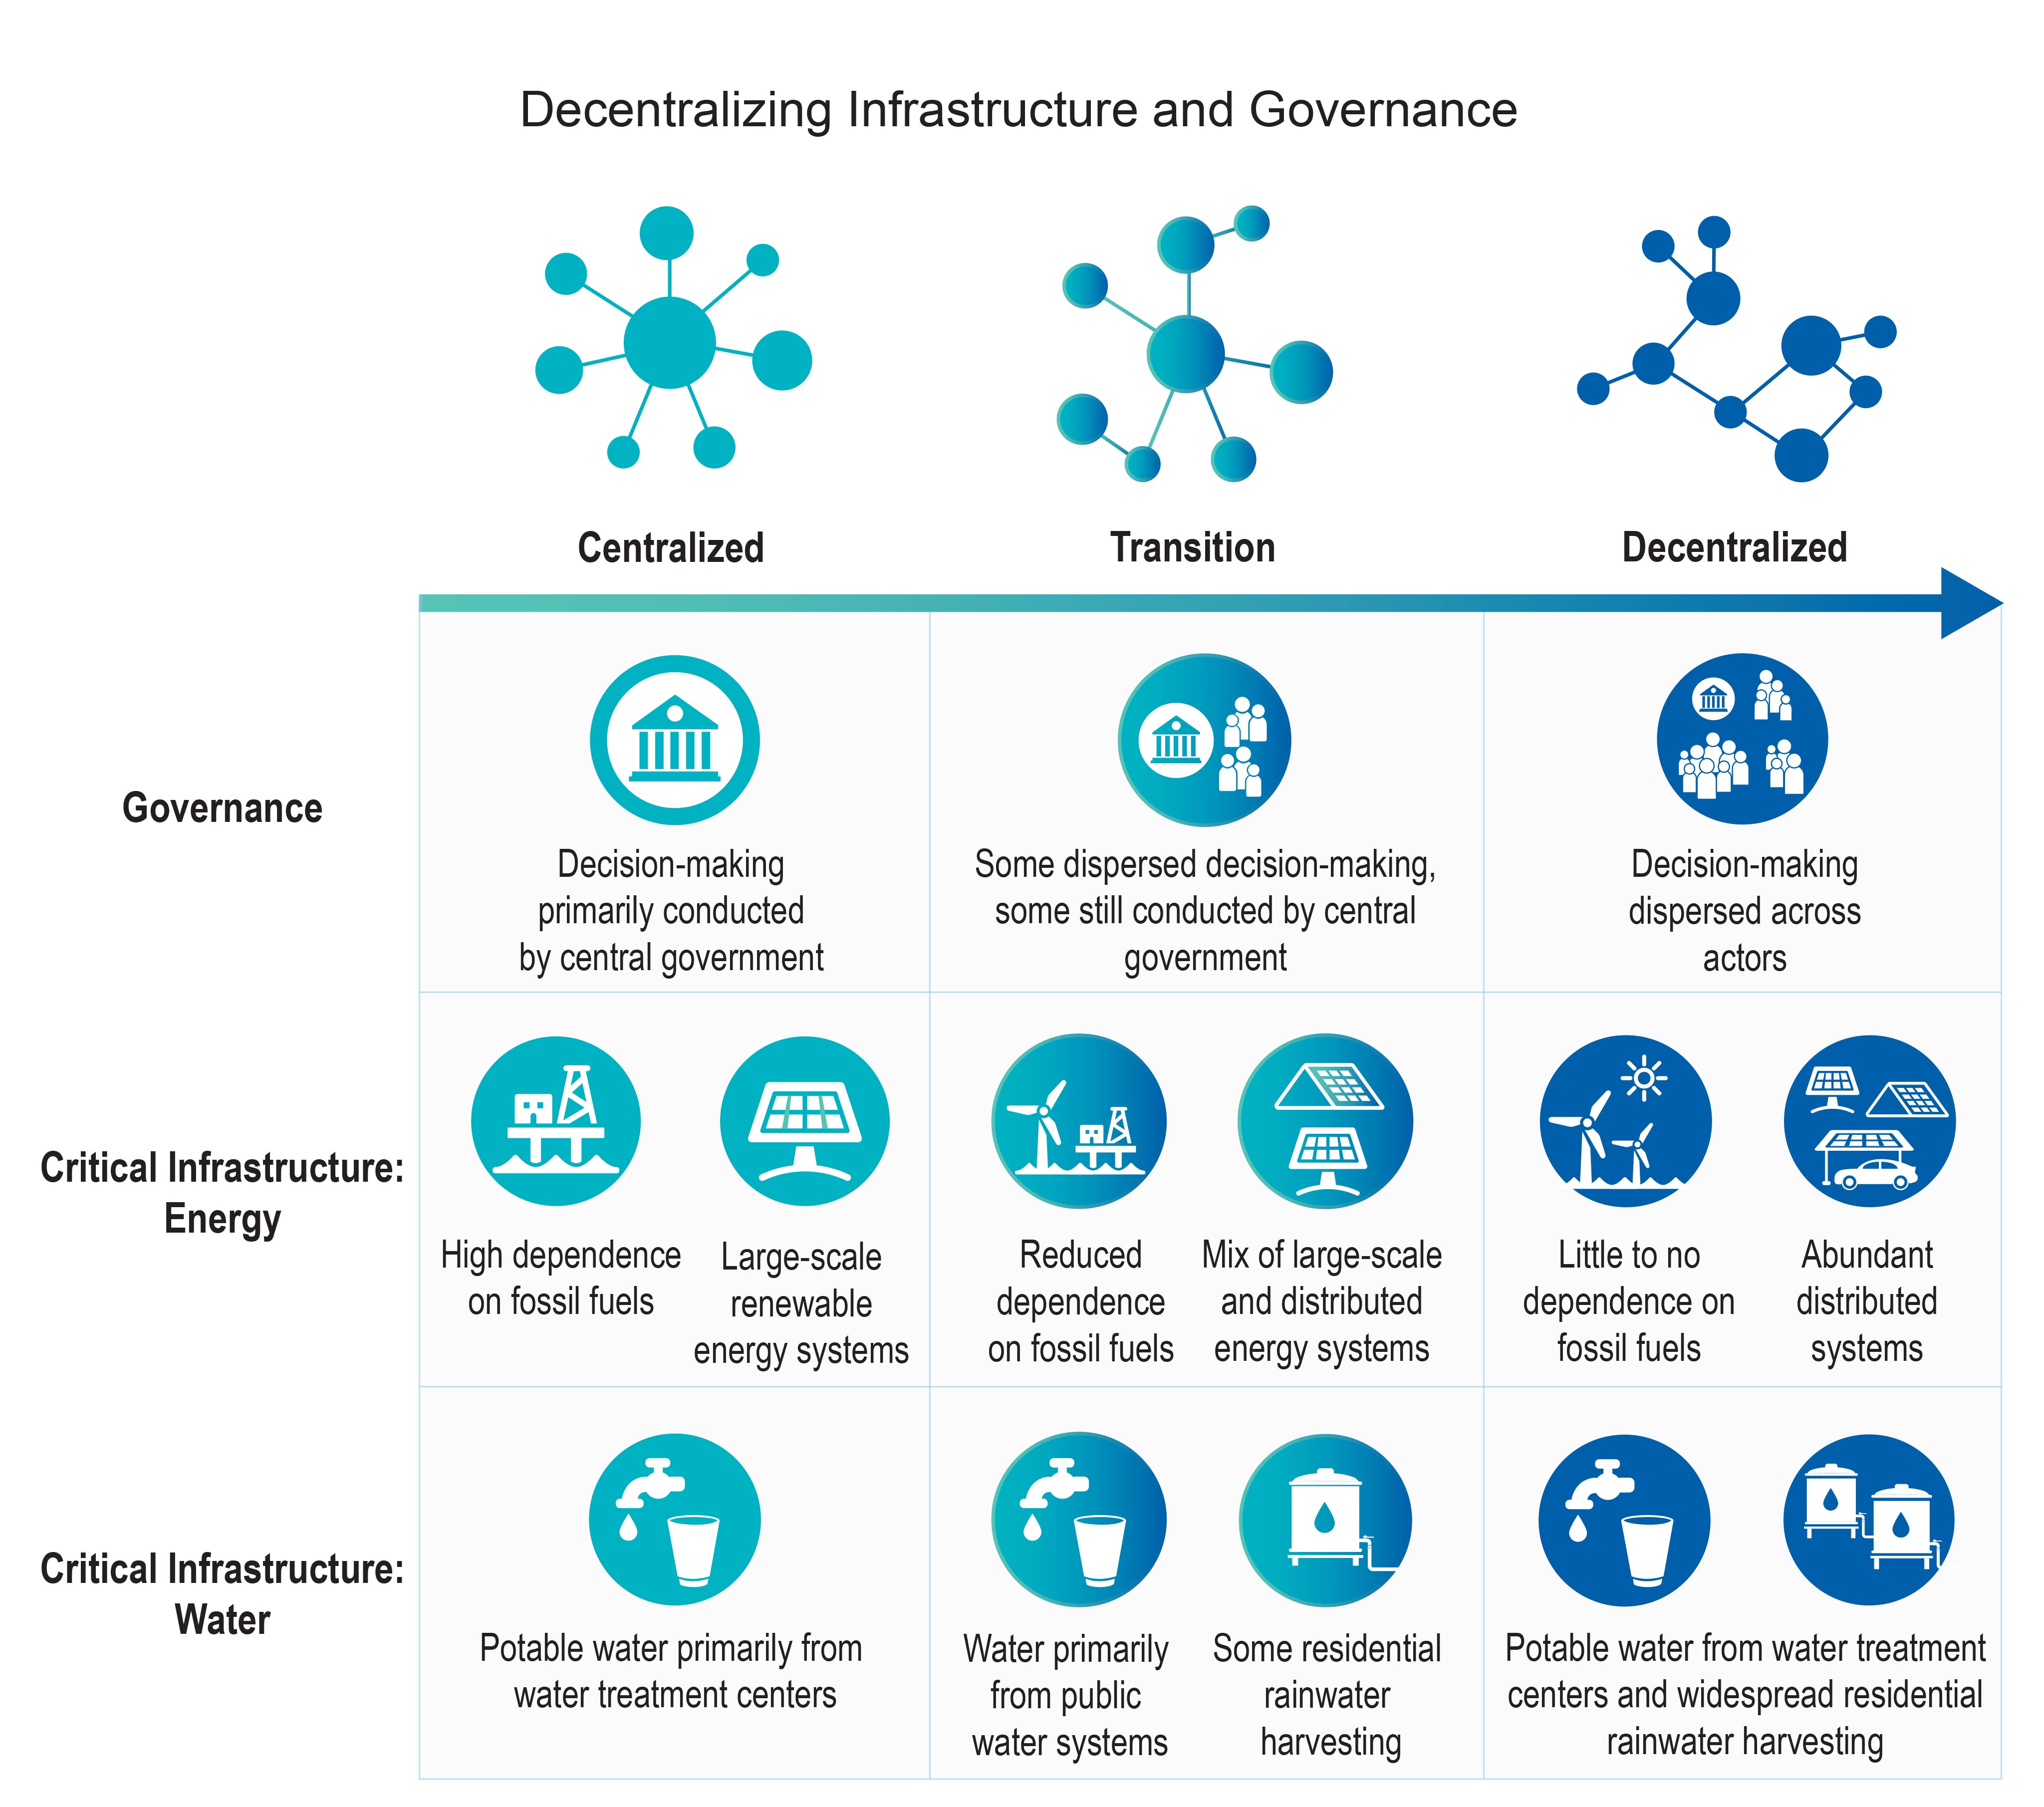 Decentralizing Infrastructure and Governance